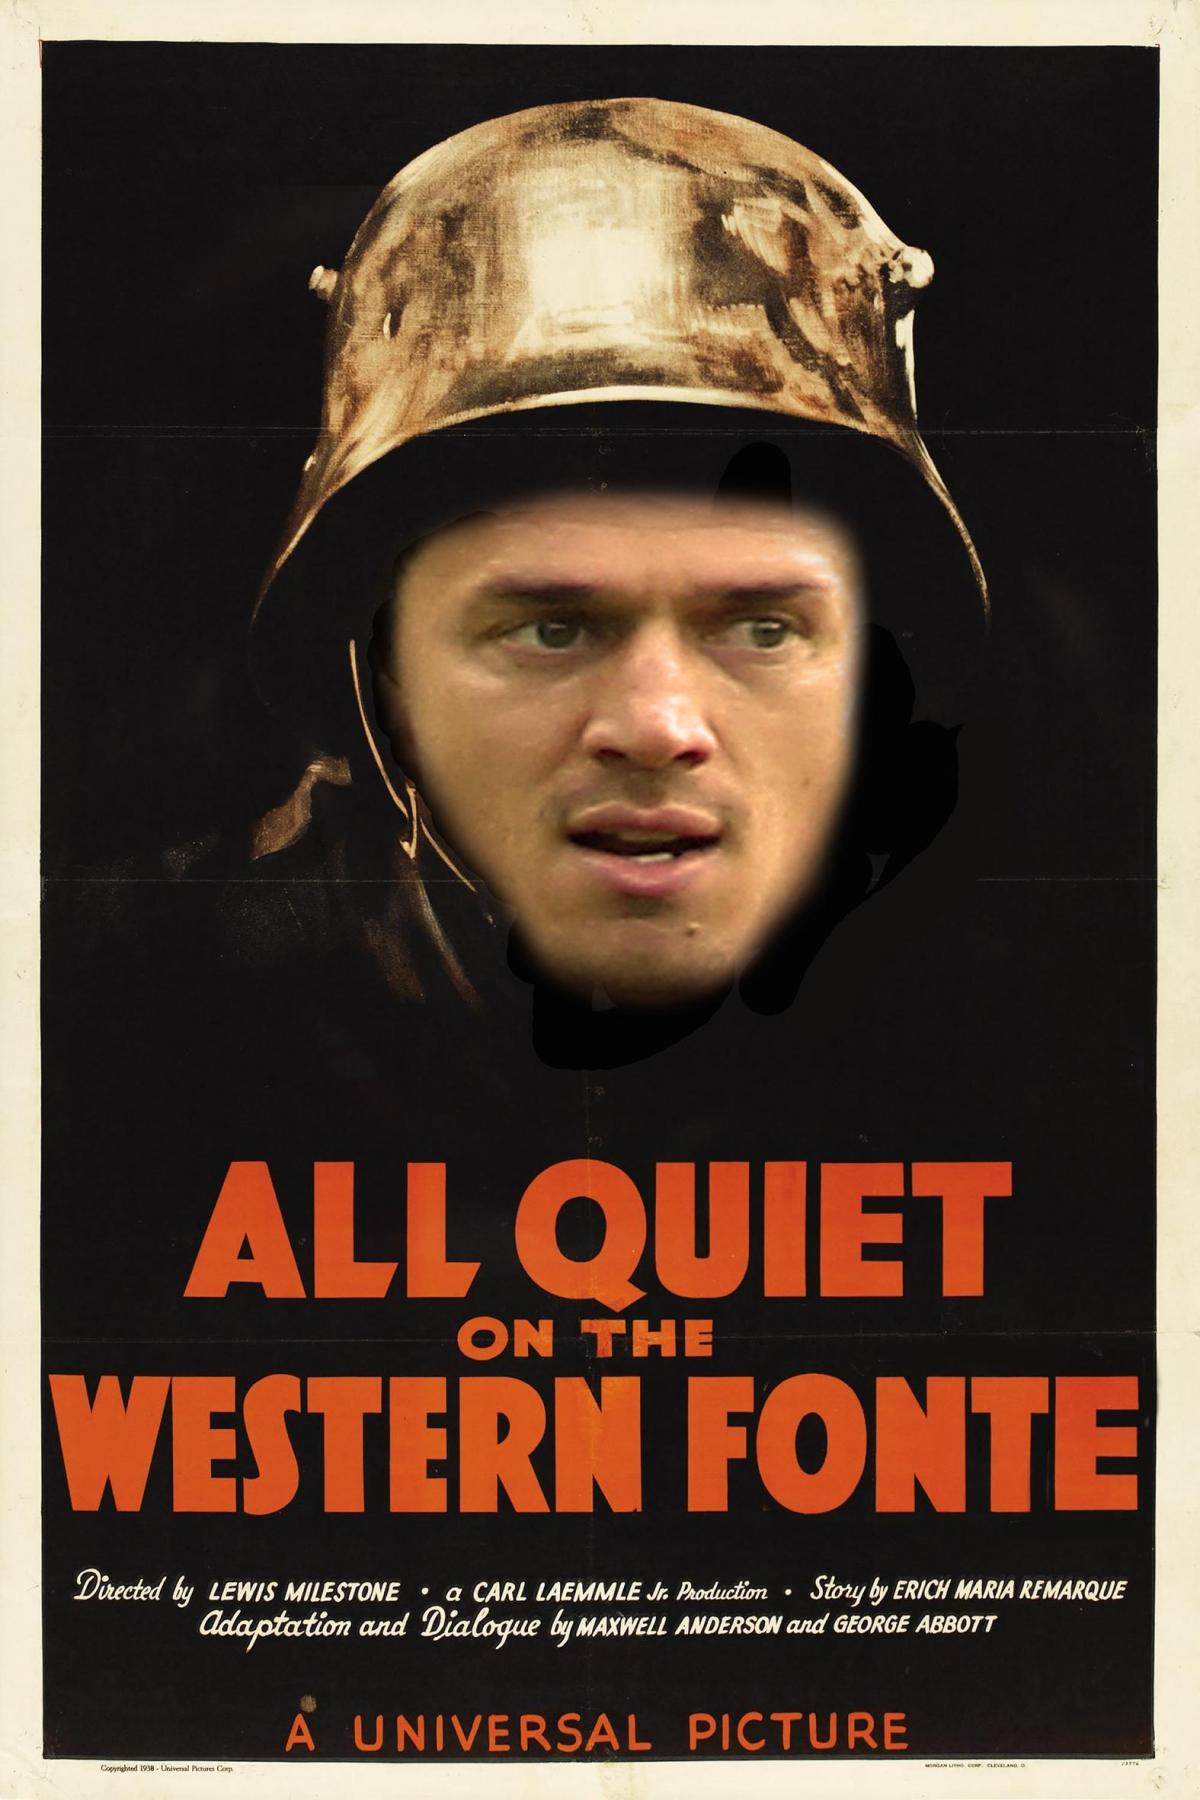 Jose Fonte - All Quiet on the Western Front